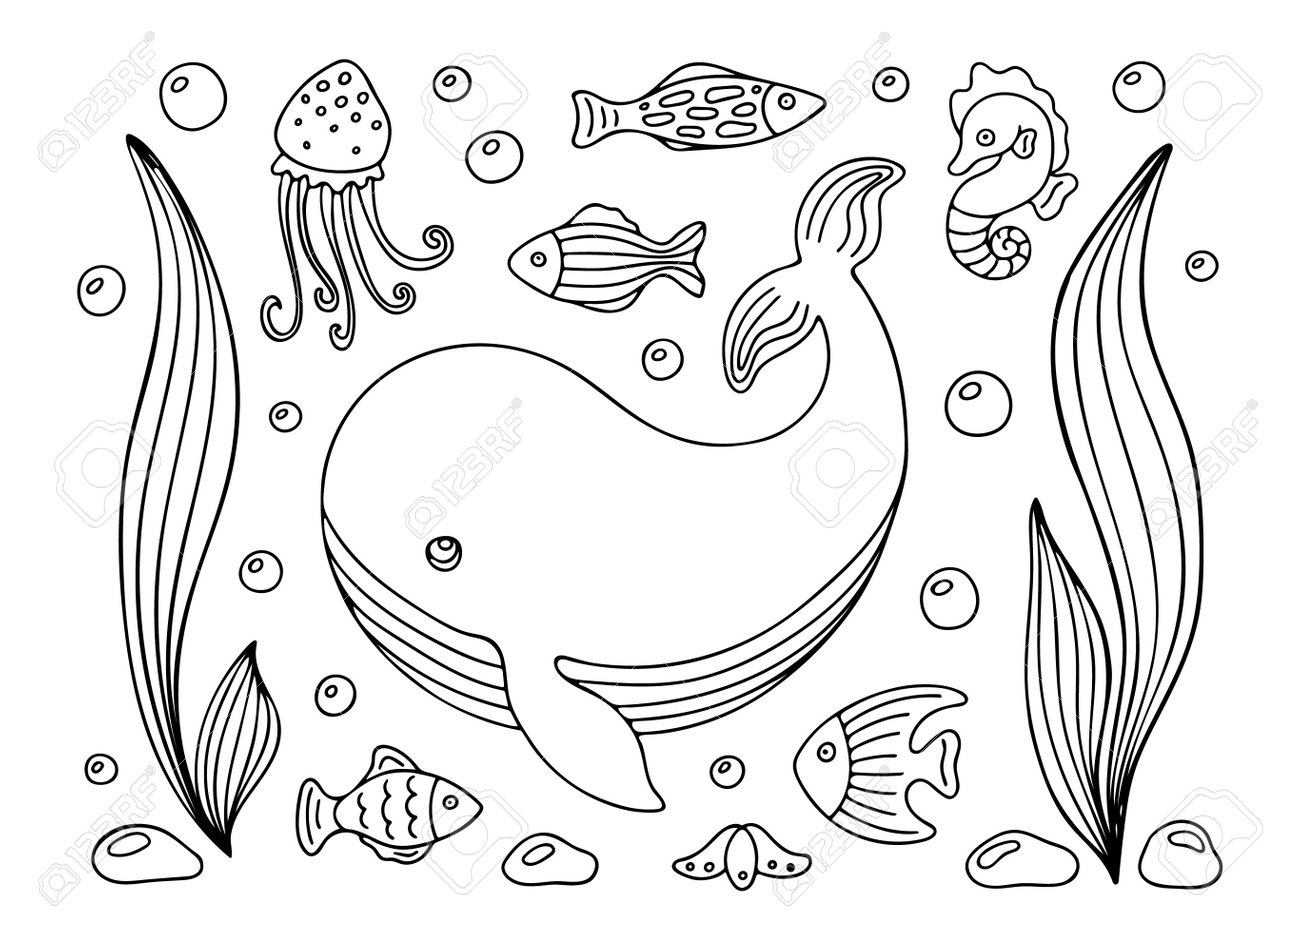 Coloring page with whale fishes and jellyfish swimming between bubbles and algae hand drawn vector contoured black and white illustration design template for kids coloring book poster or postcard royalty free svg